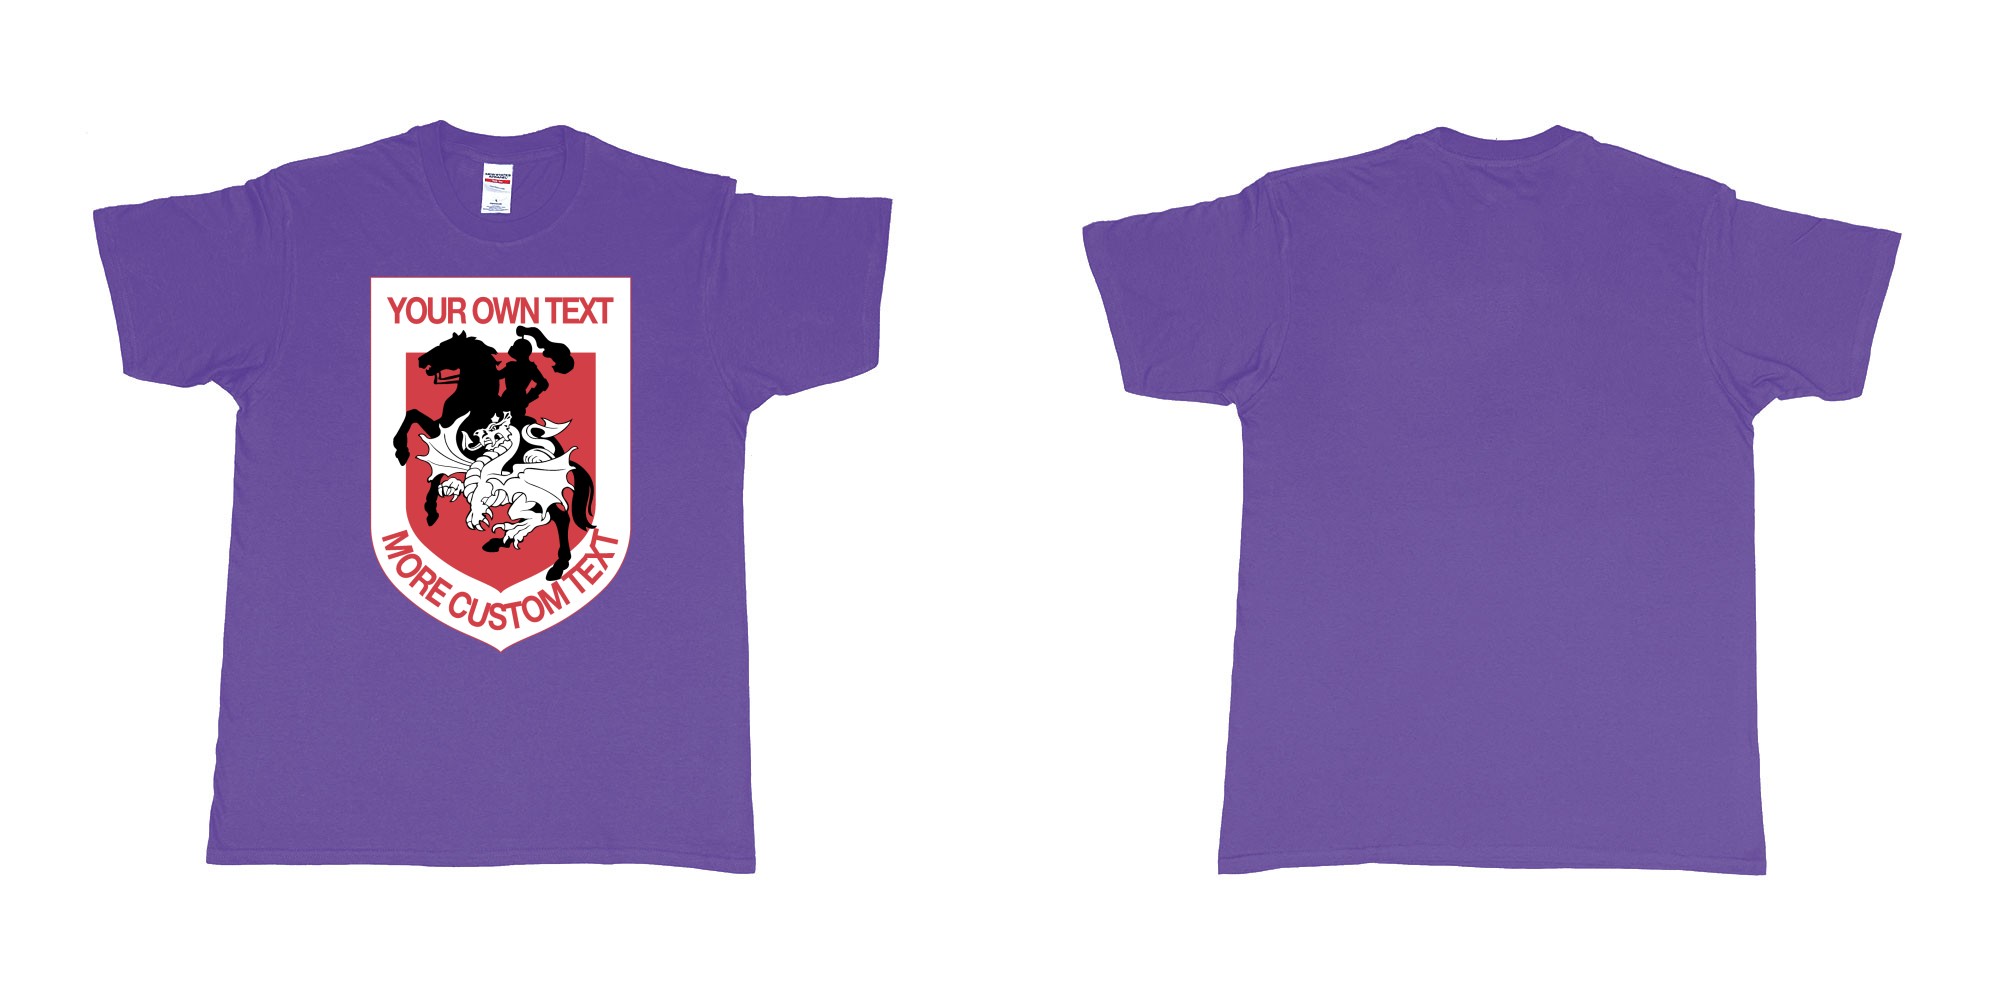 Custom tshirt design st george illawarra dragons custom design in fabric color purple choice your own text made in Bali by The Pirate Way